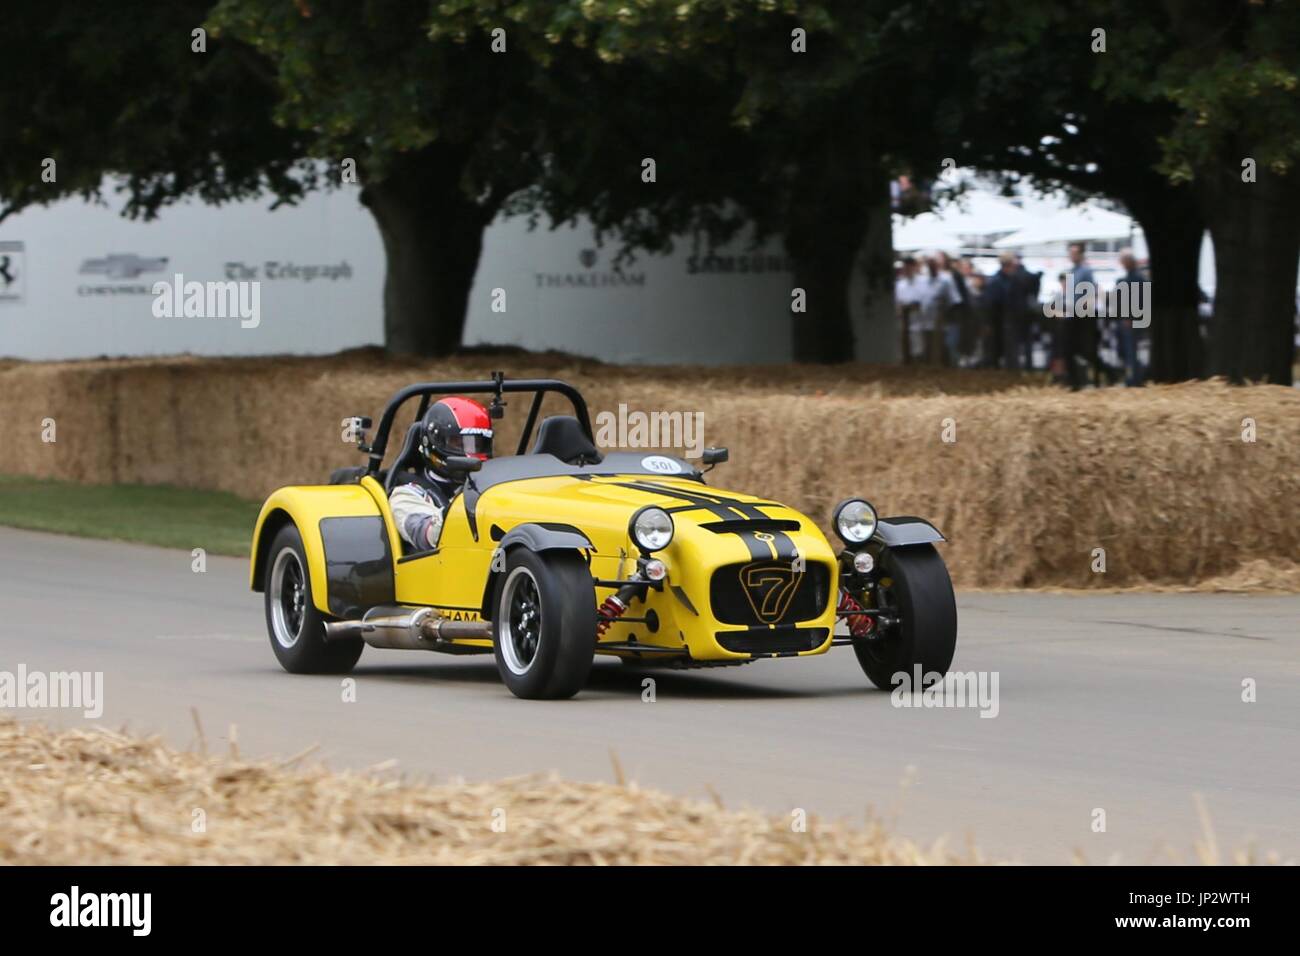 Goodwood Festival of Speed 2017 - Day 1 - Goodwood Hillclimb  Featuring: Caterham Super 7 Where: Chichester, United Kingdom When: 29 Jun 2017 Credit: Michael Wright/WENN.com Stock Photo